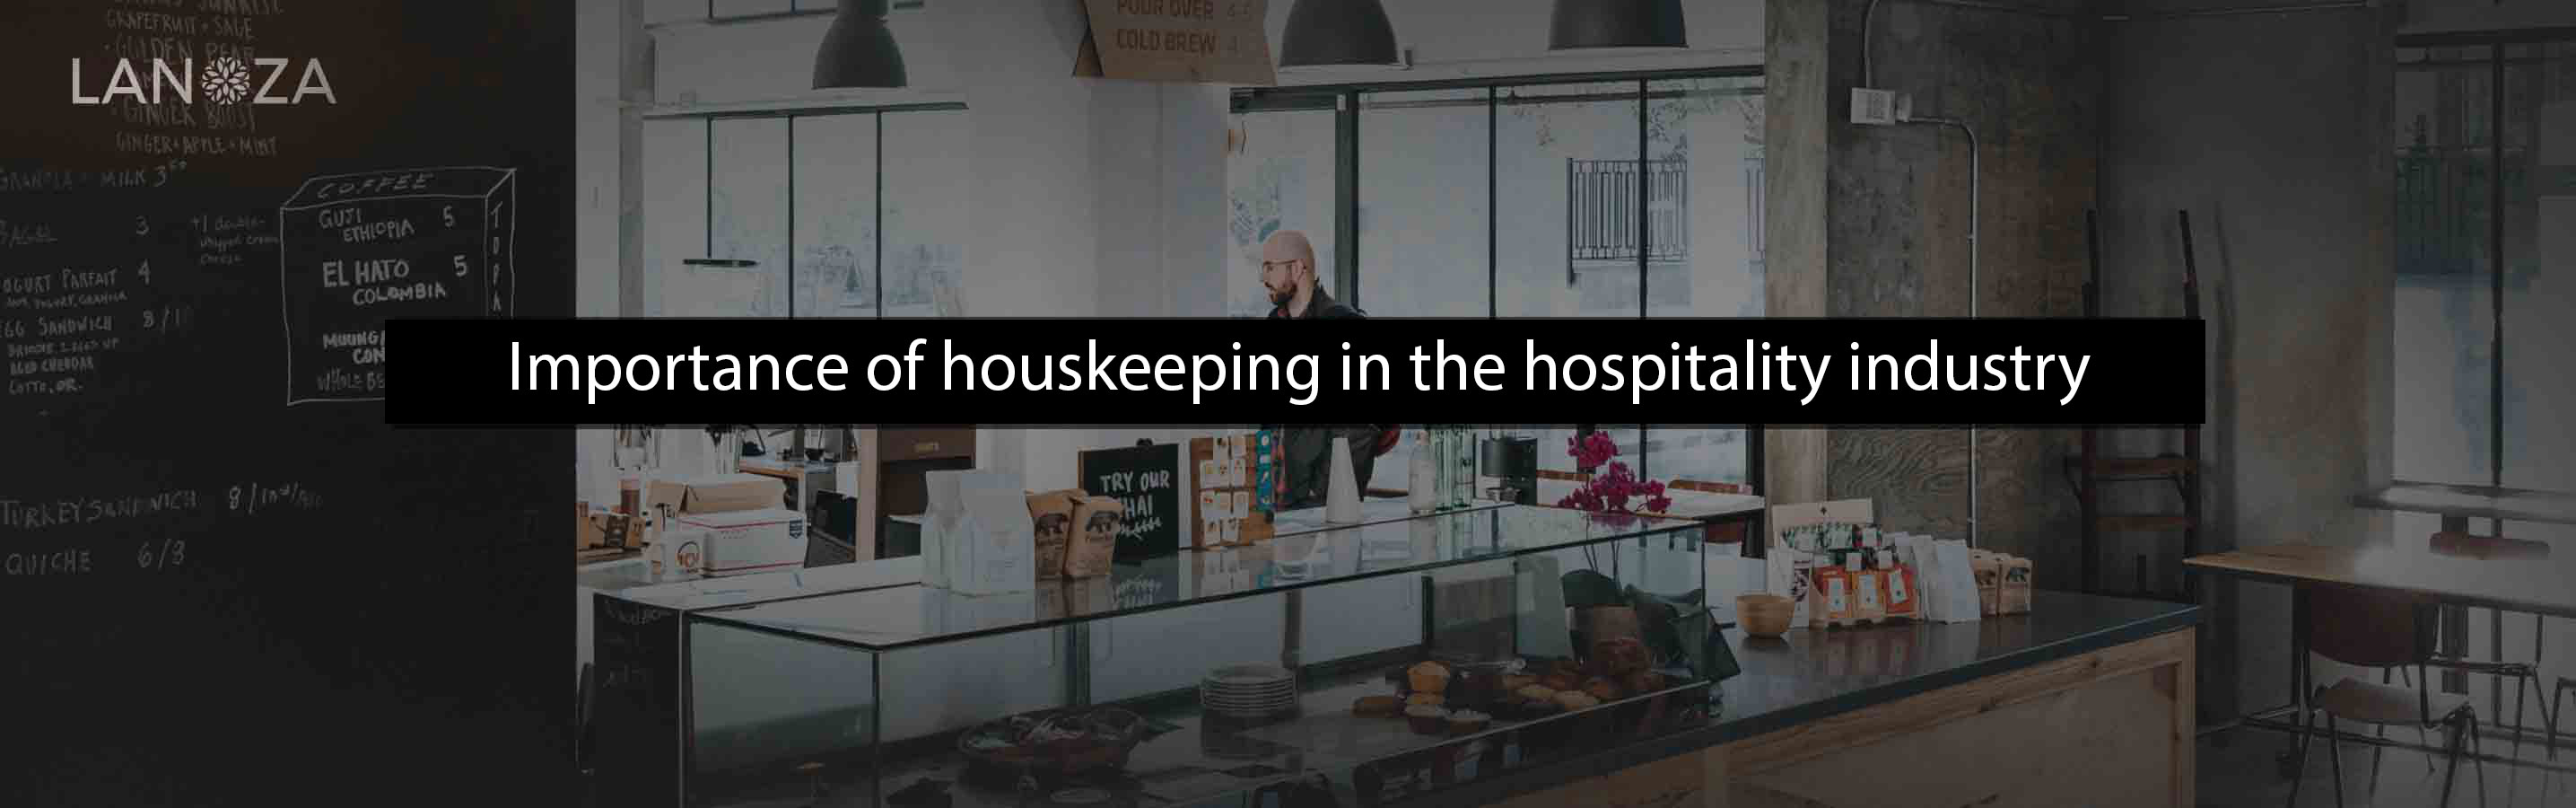 importance-of-housekeeping-in-the-hospitality-industry